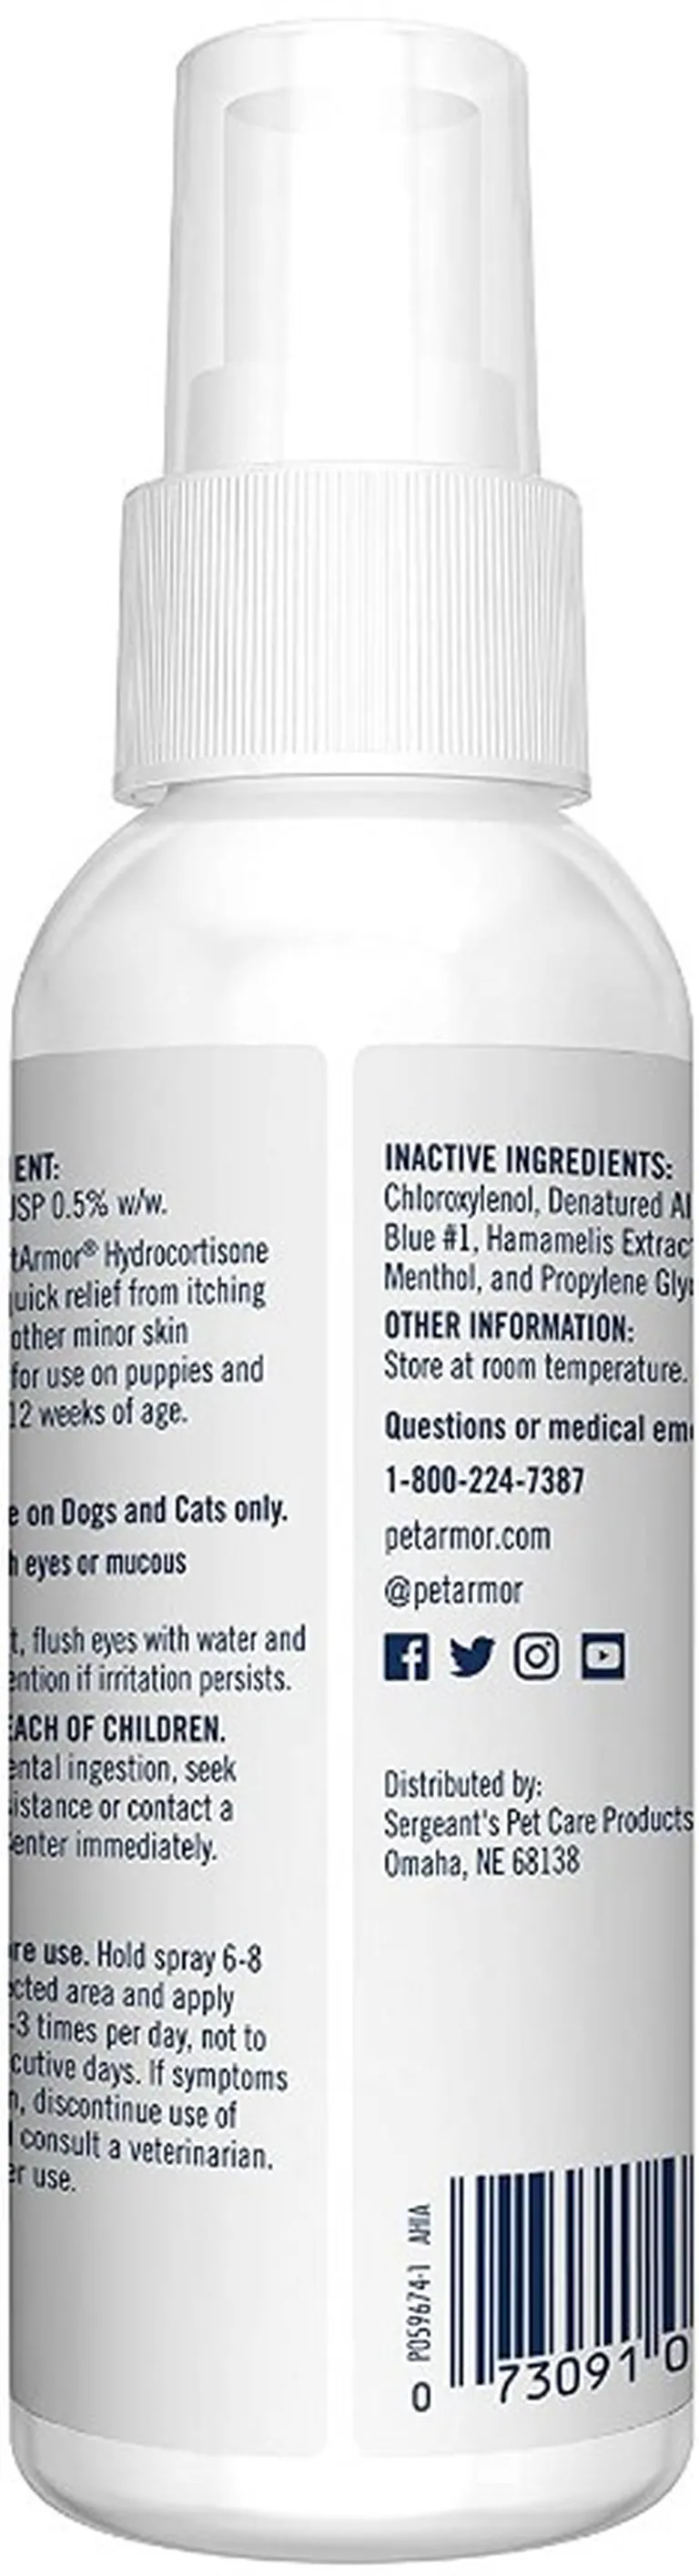 PetArmor Hydrocortisone Spray Quick Relief for Dogs and Cats Photo 2